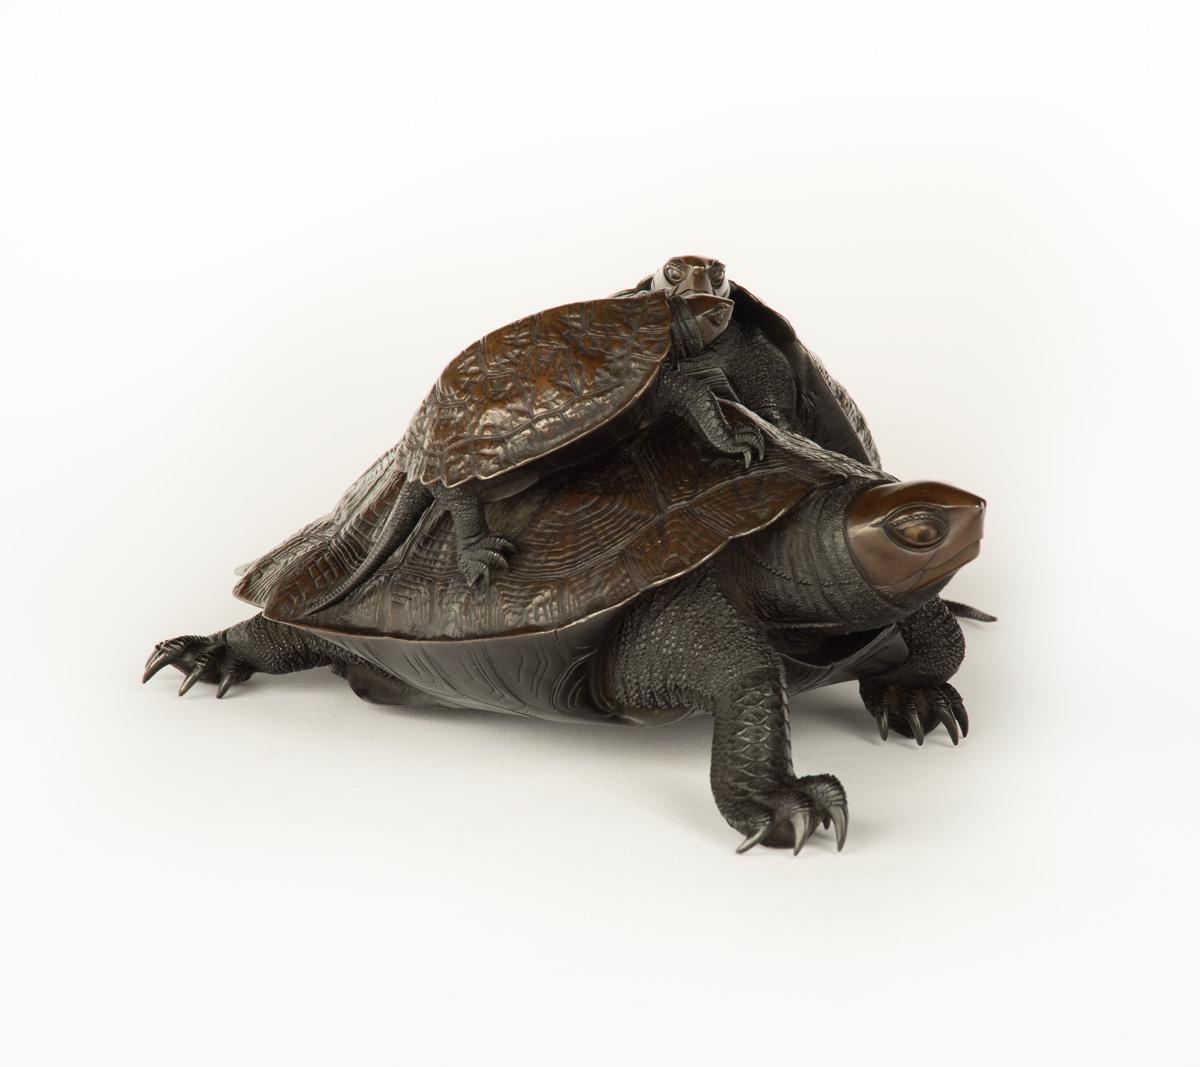 As part of our Japanese works of art collection we are delighted to offer this large scale exceptional quality Meiji period (1868-1912) okimono group of infant turtles clambering upon the larger adult. The main body of the turtles are formed from